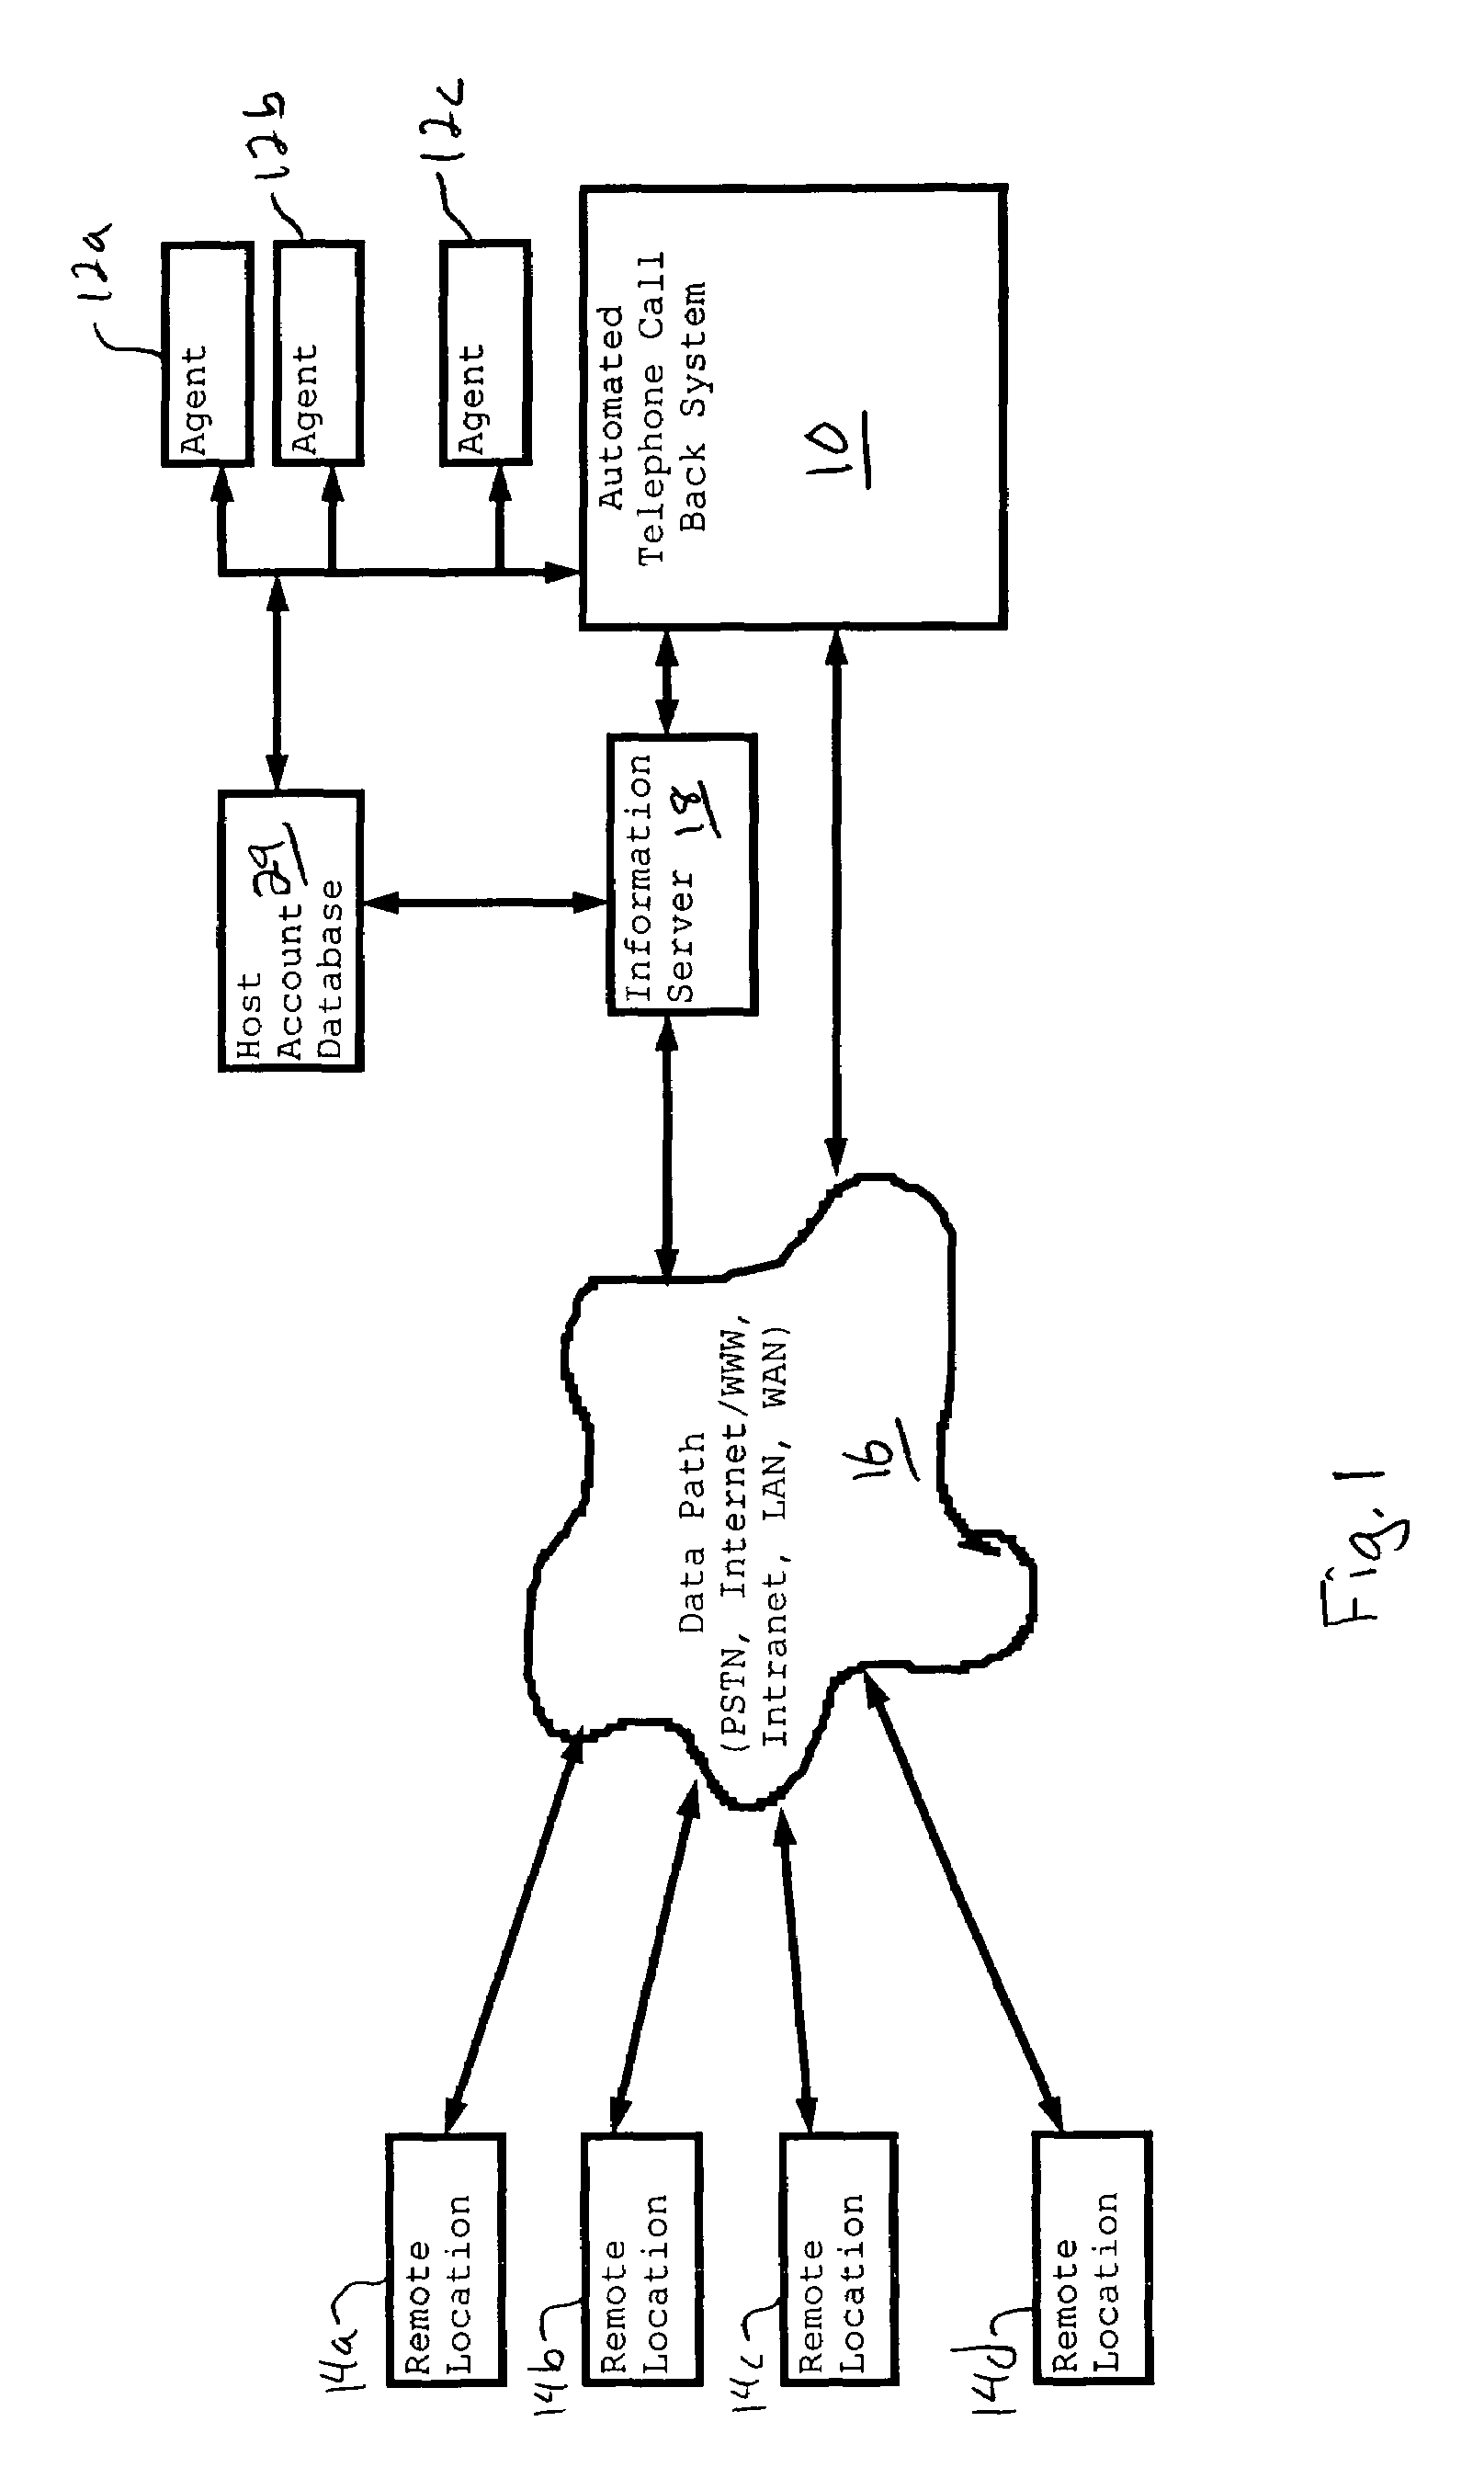 System and method for providing an automatic telephone call back from information provided at a data terminal